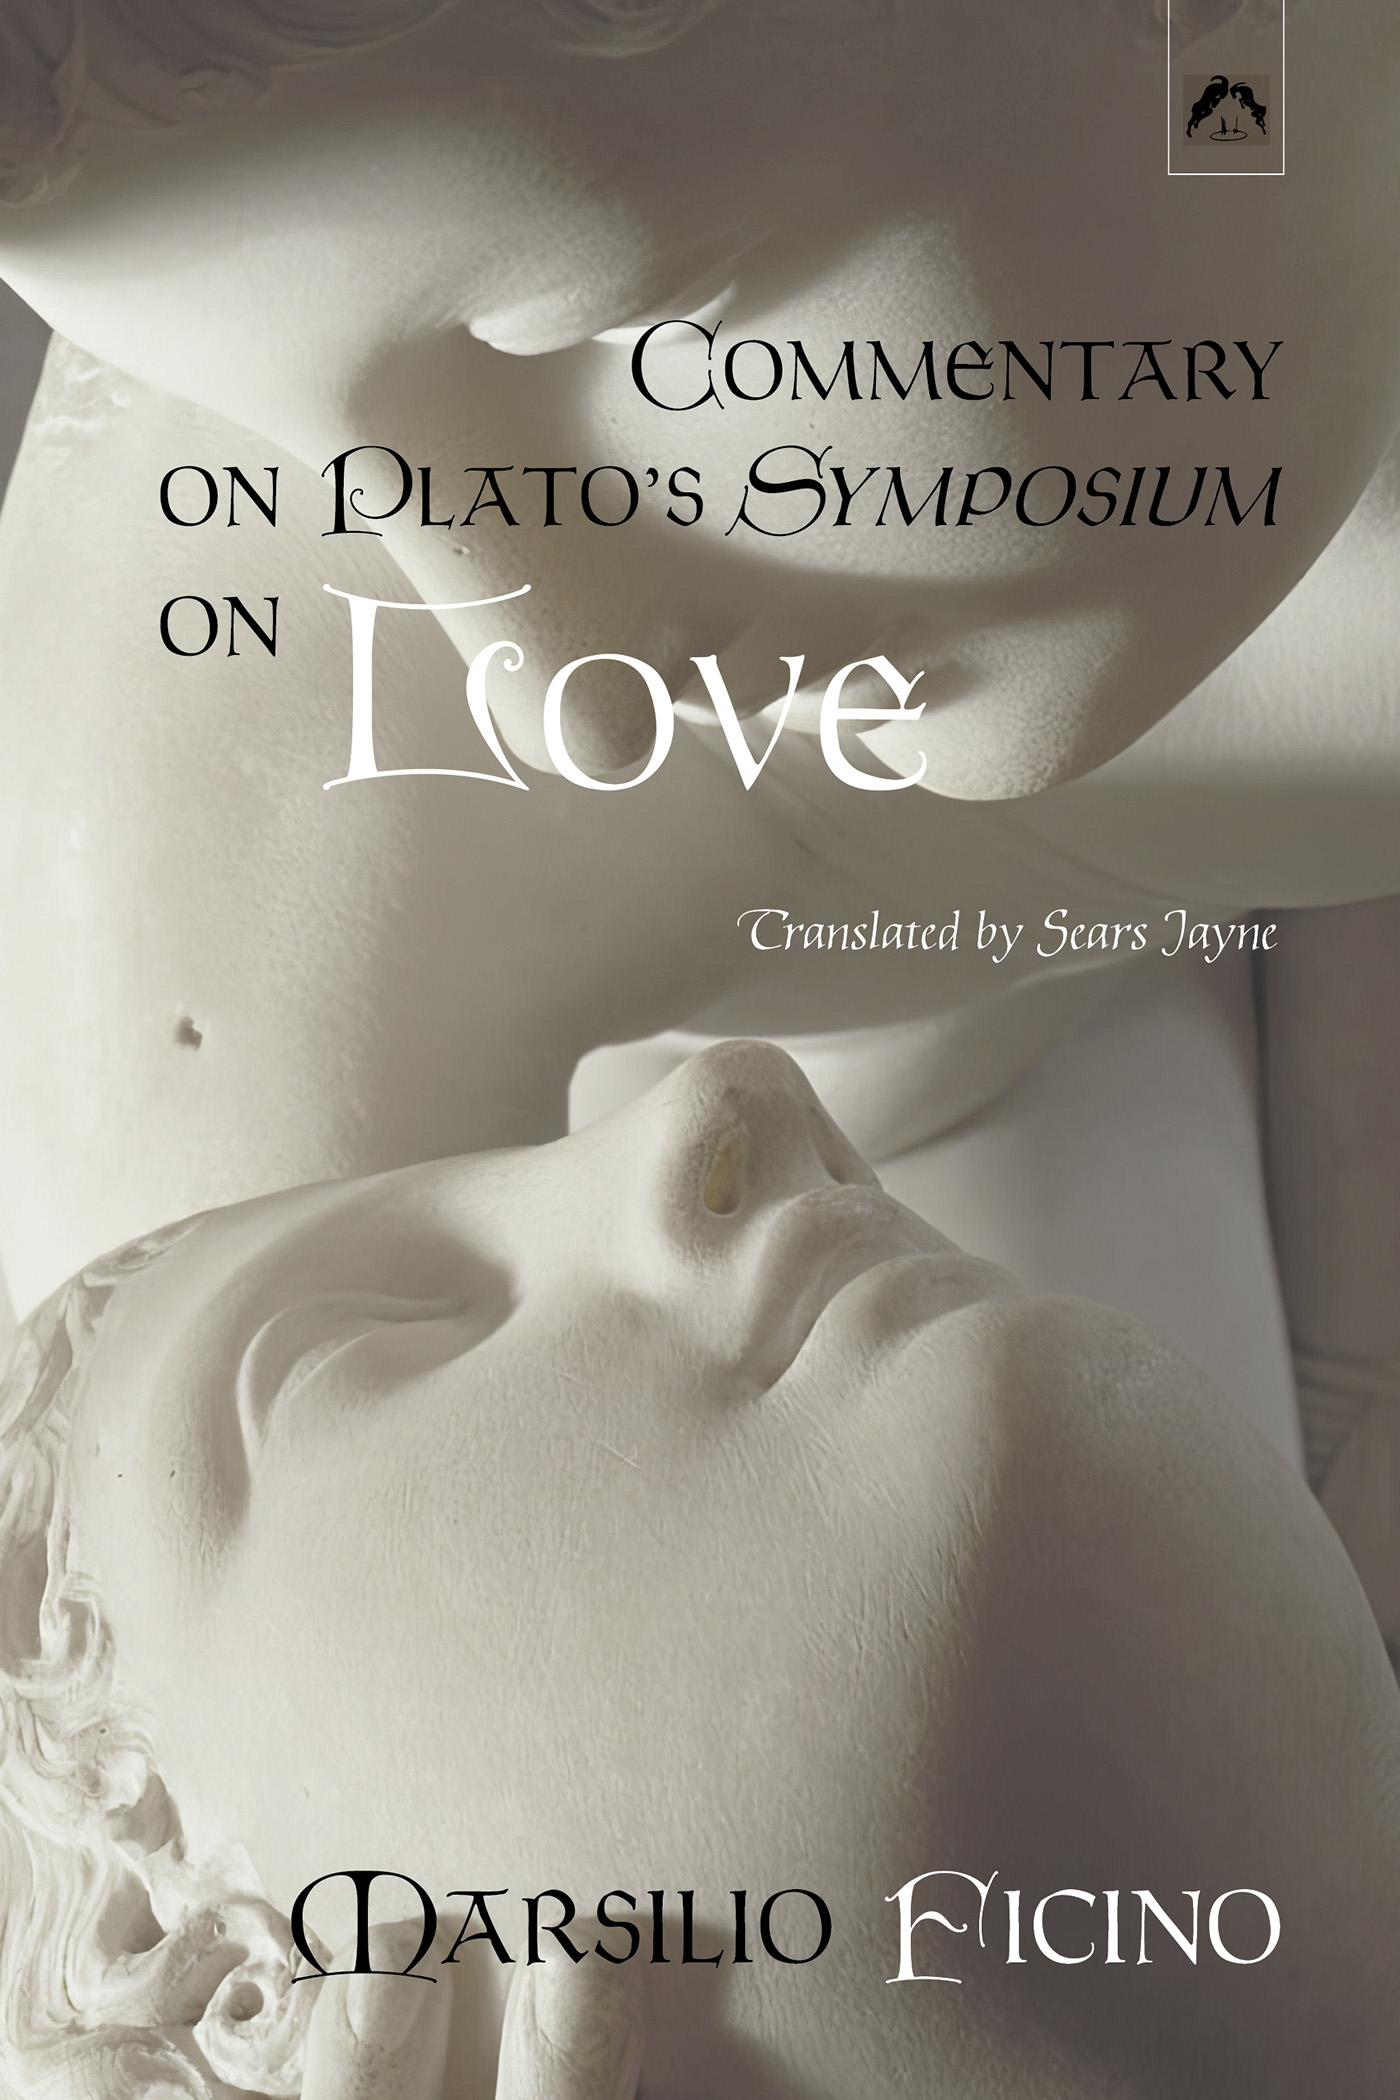 Cover art featuring Canova's Psyche Revived by Cupid's Kiss